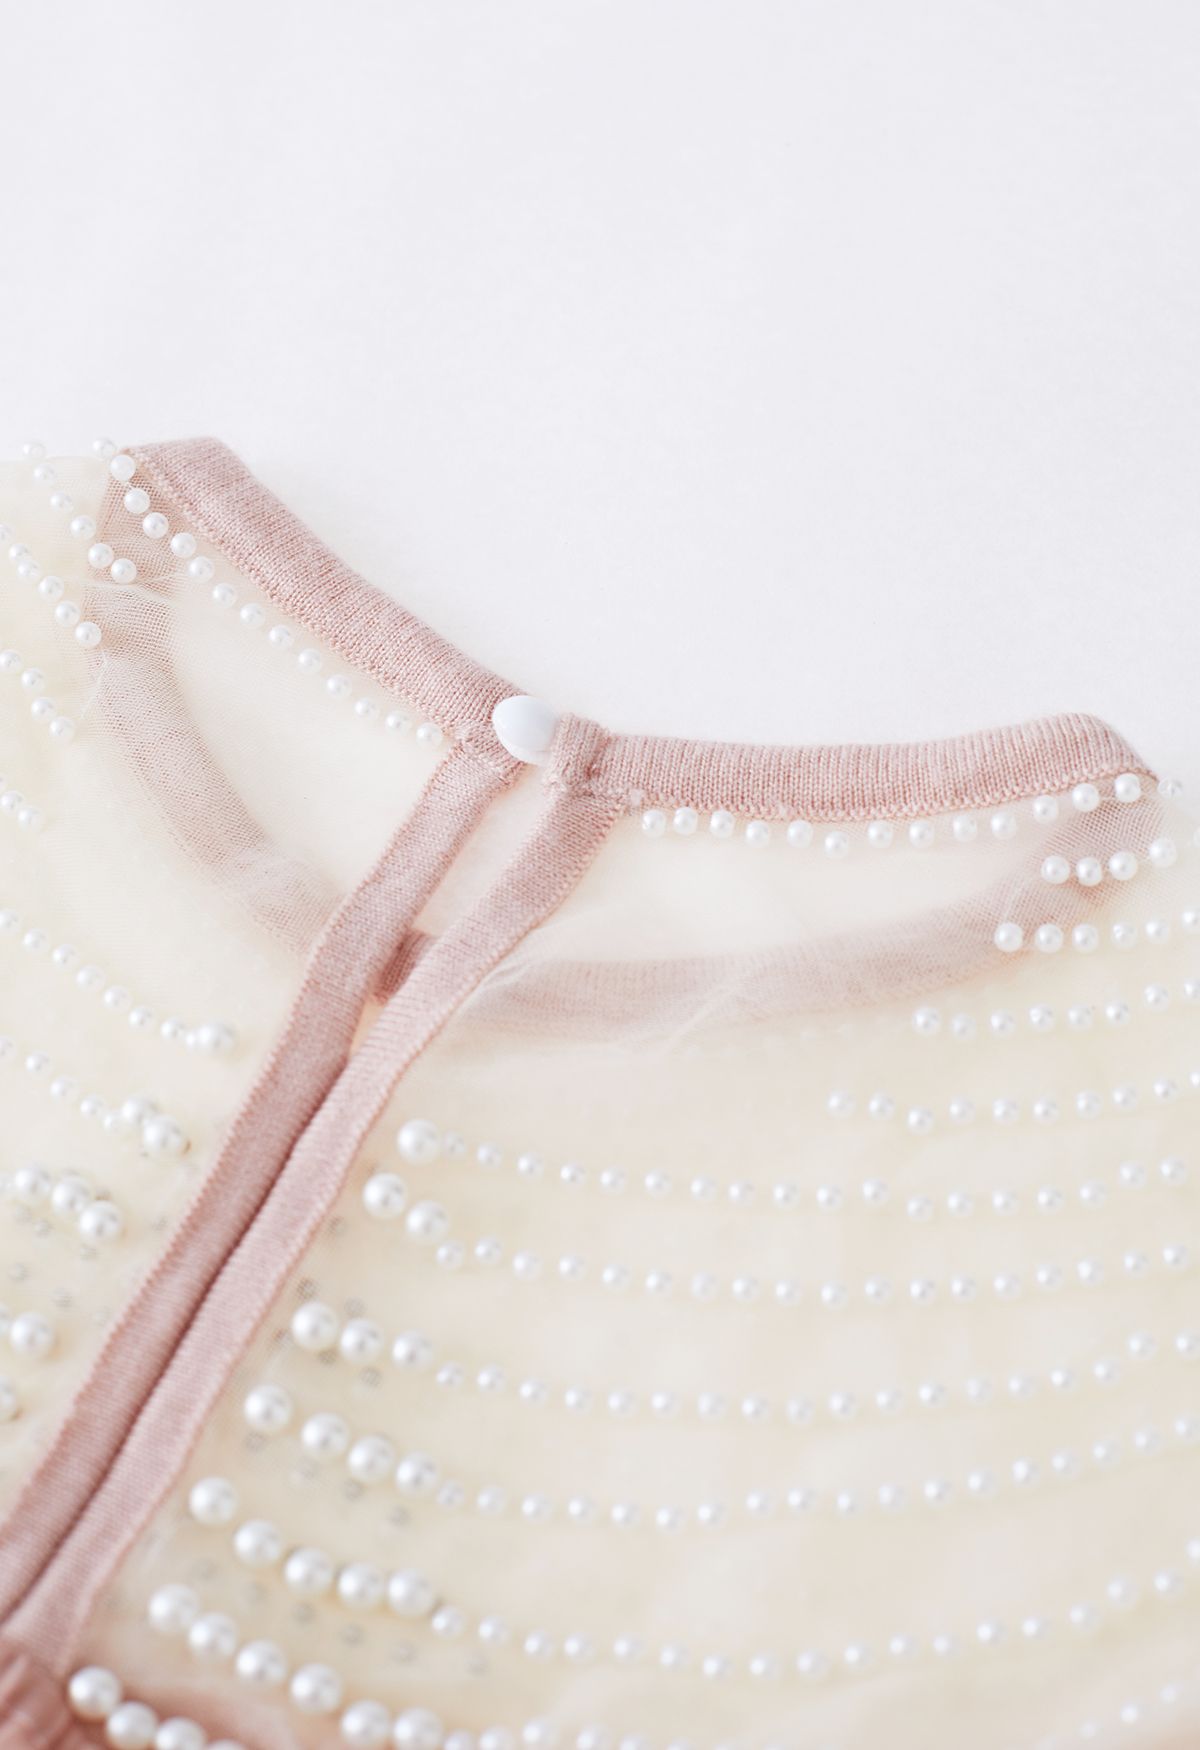 Pearly Neck Ruffle Knit Top in Pink